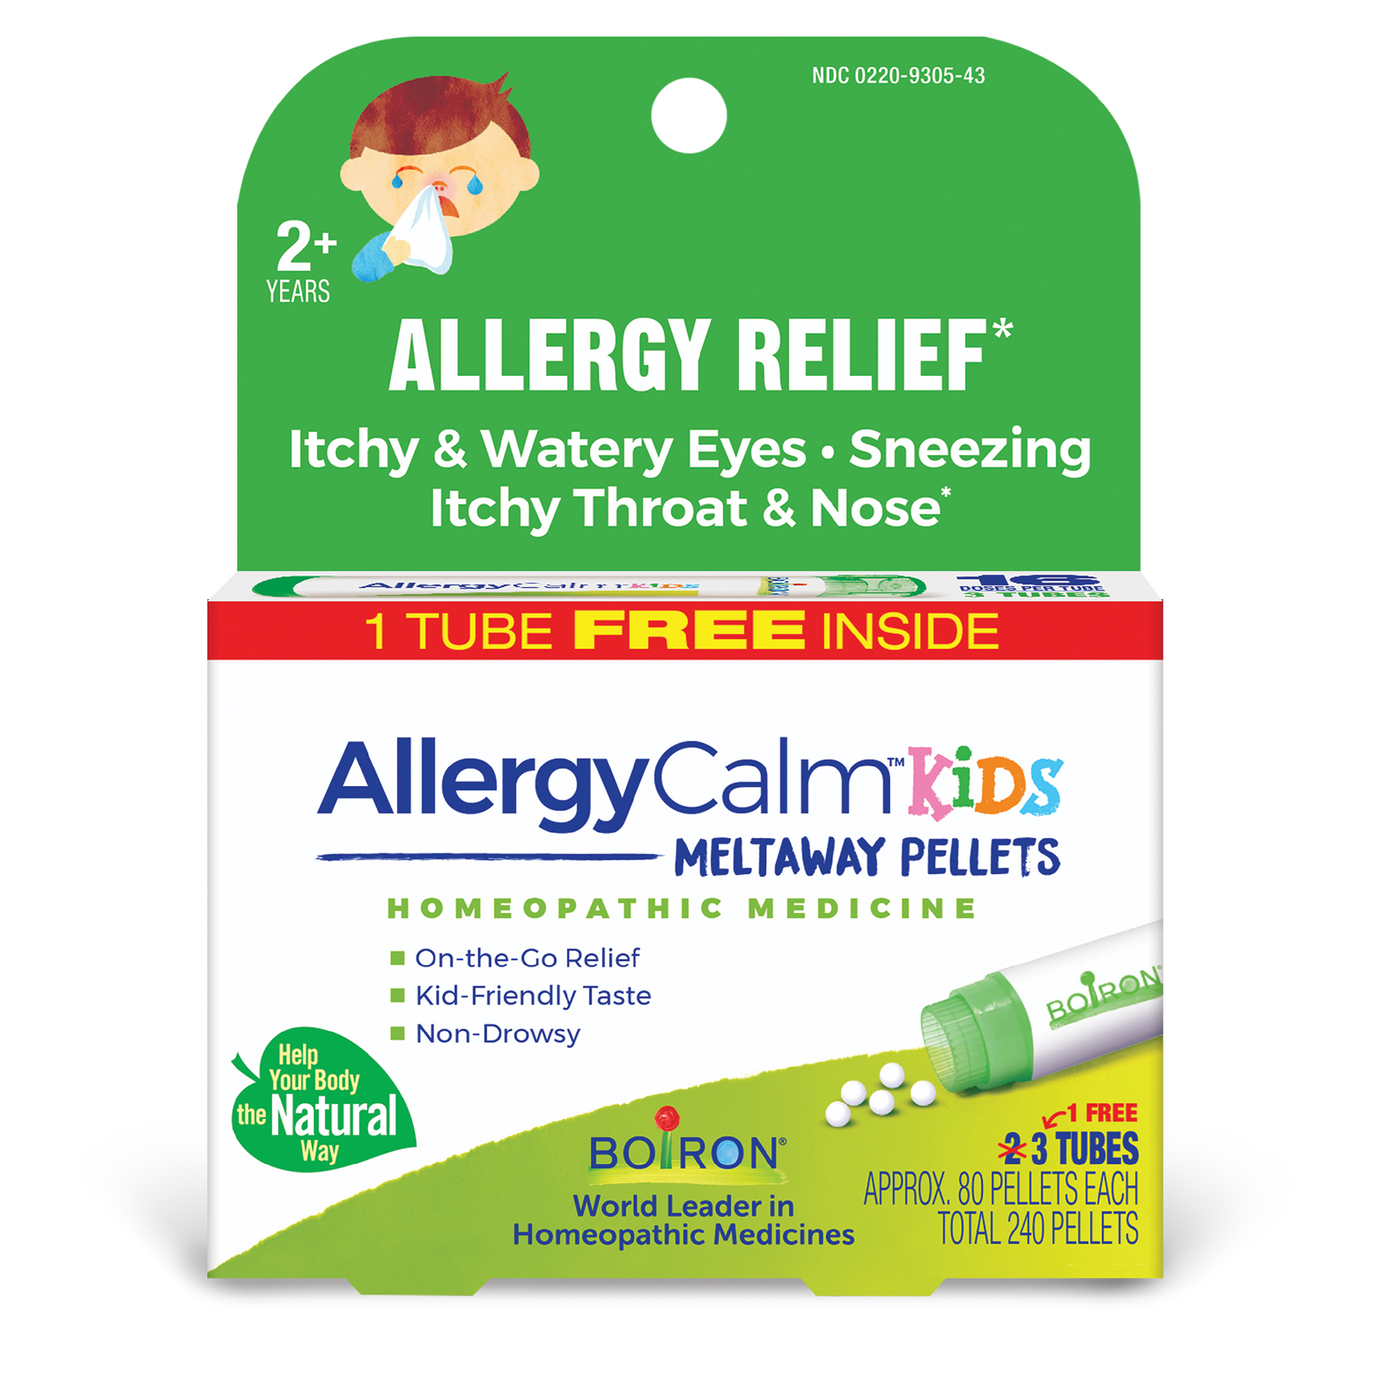 AllergyCalm Kids Pellets 3 tubes Curated Wellness